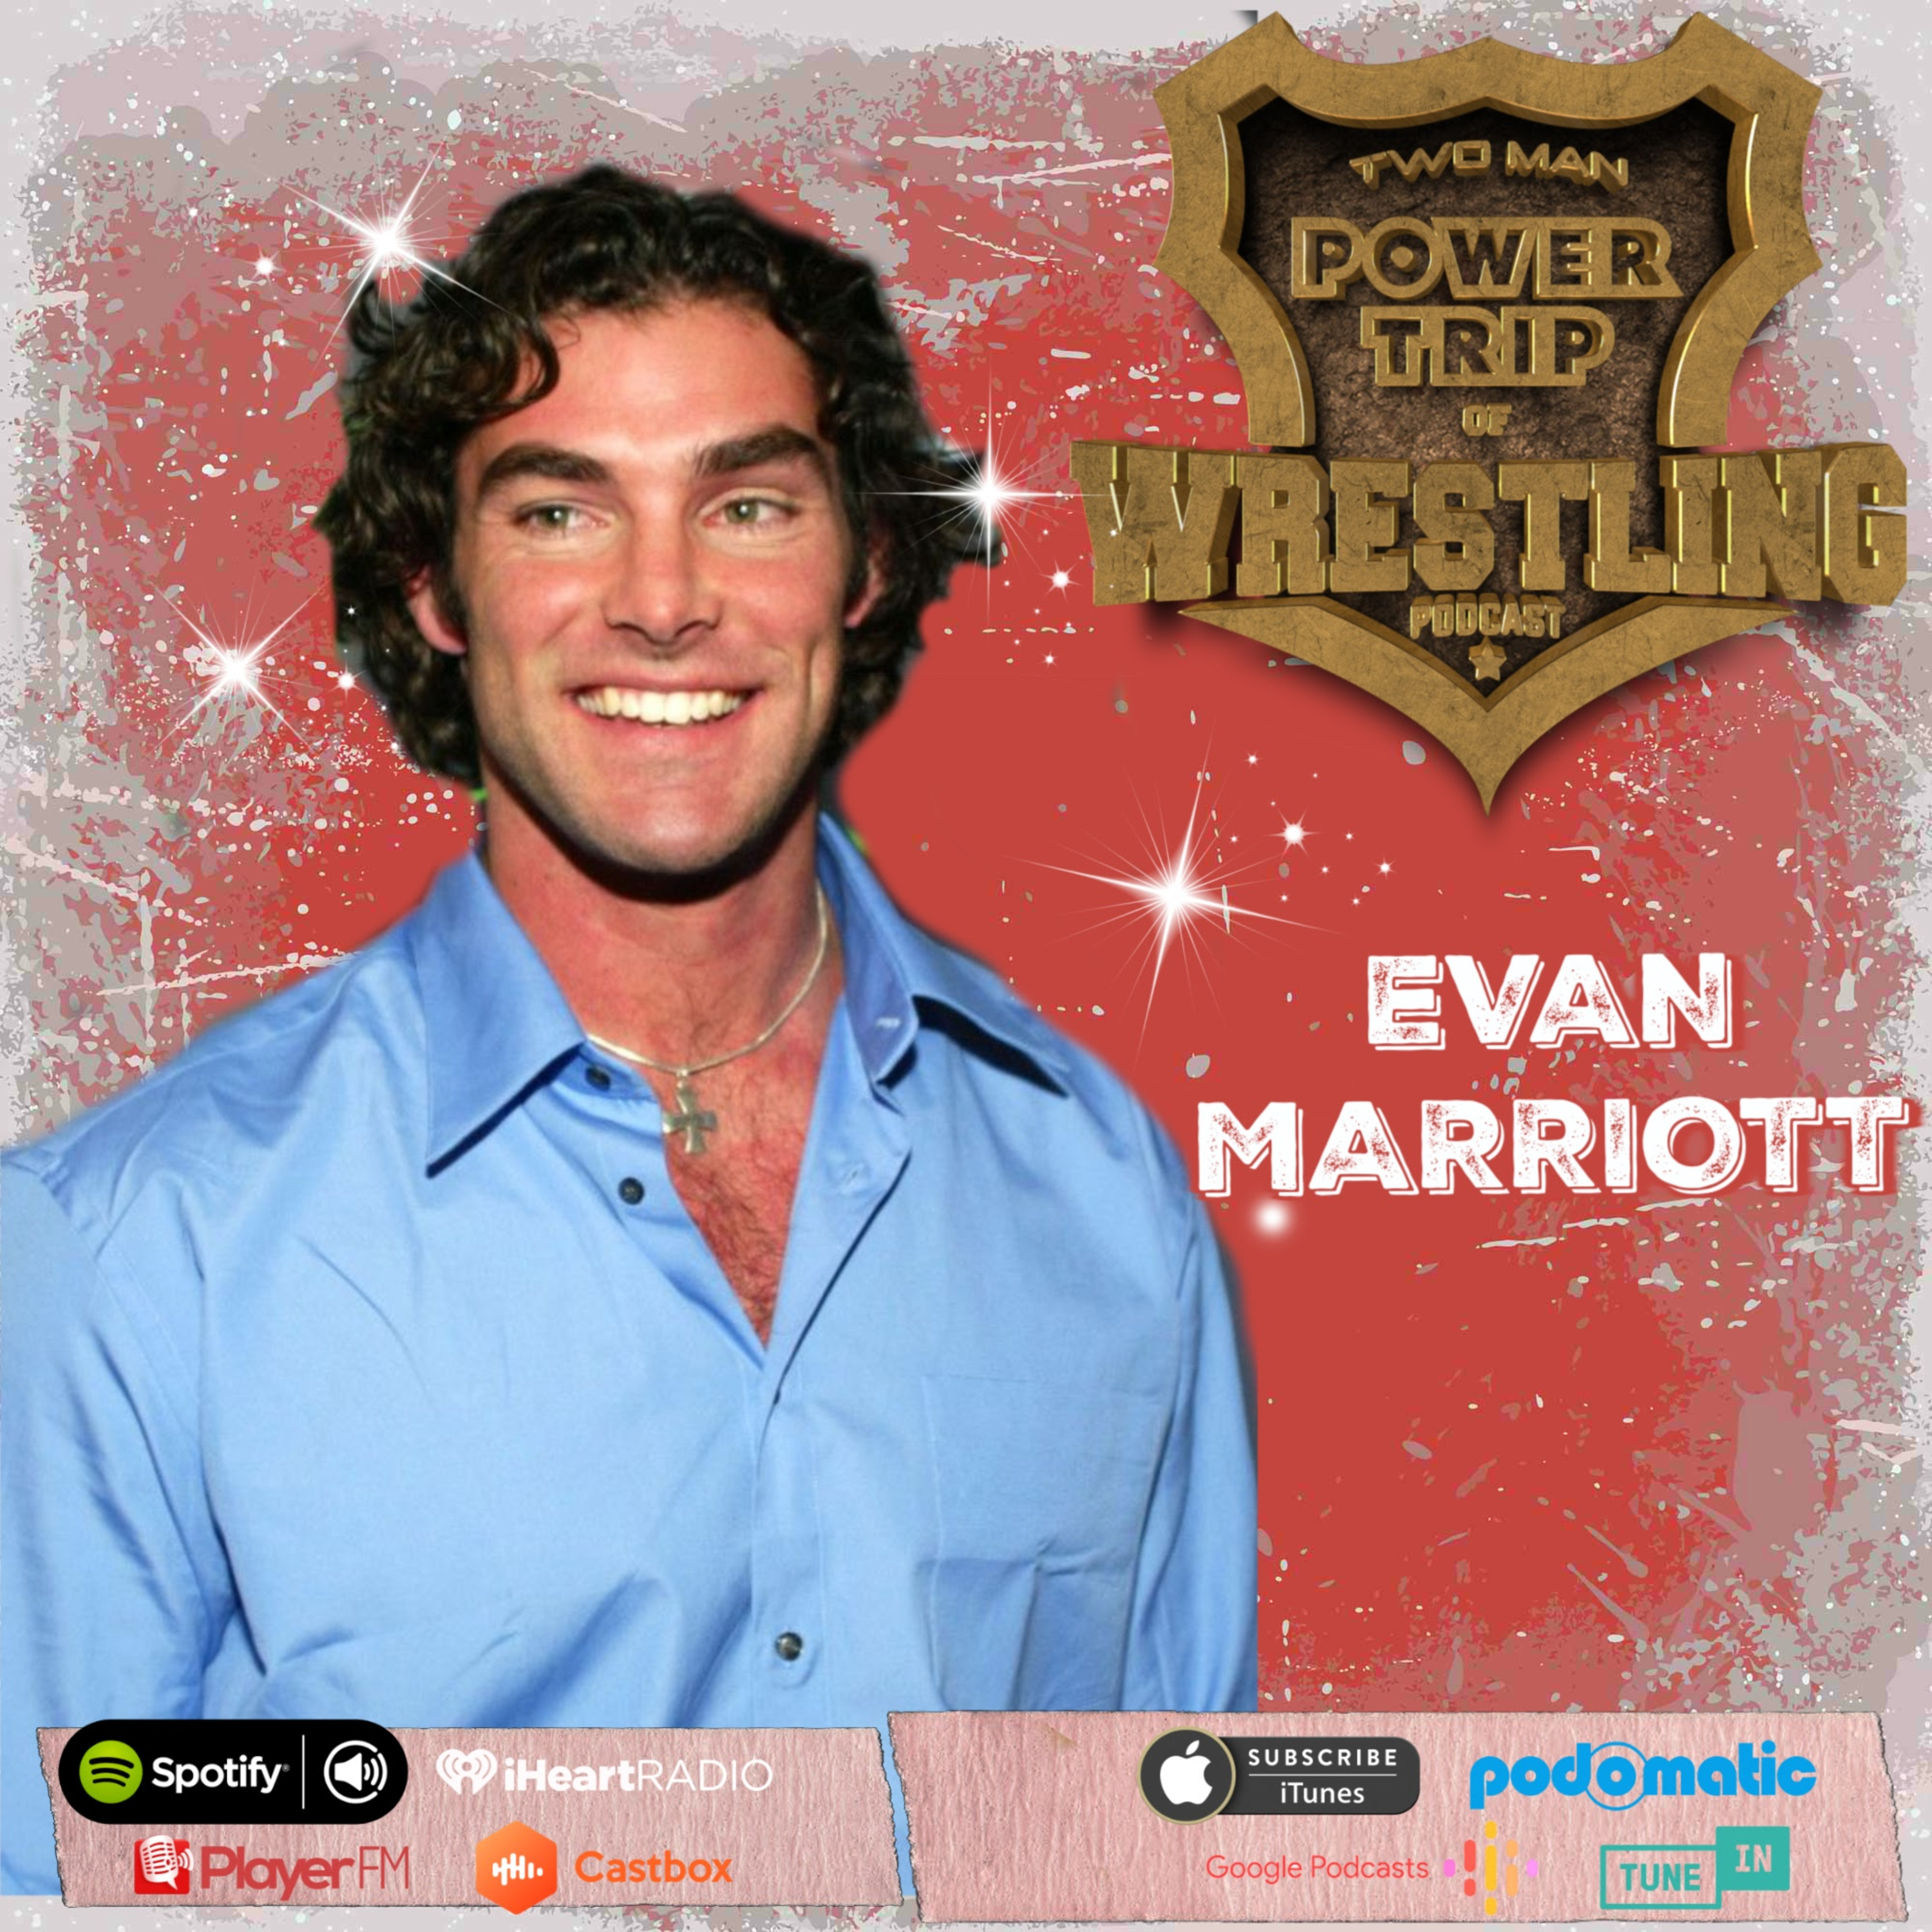 TMPT Feature Show: Evan Marriott * Two Man Power Trip of Wrestling Podcast.